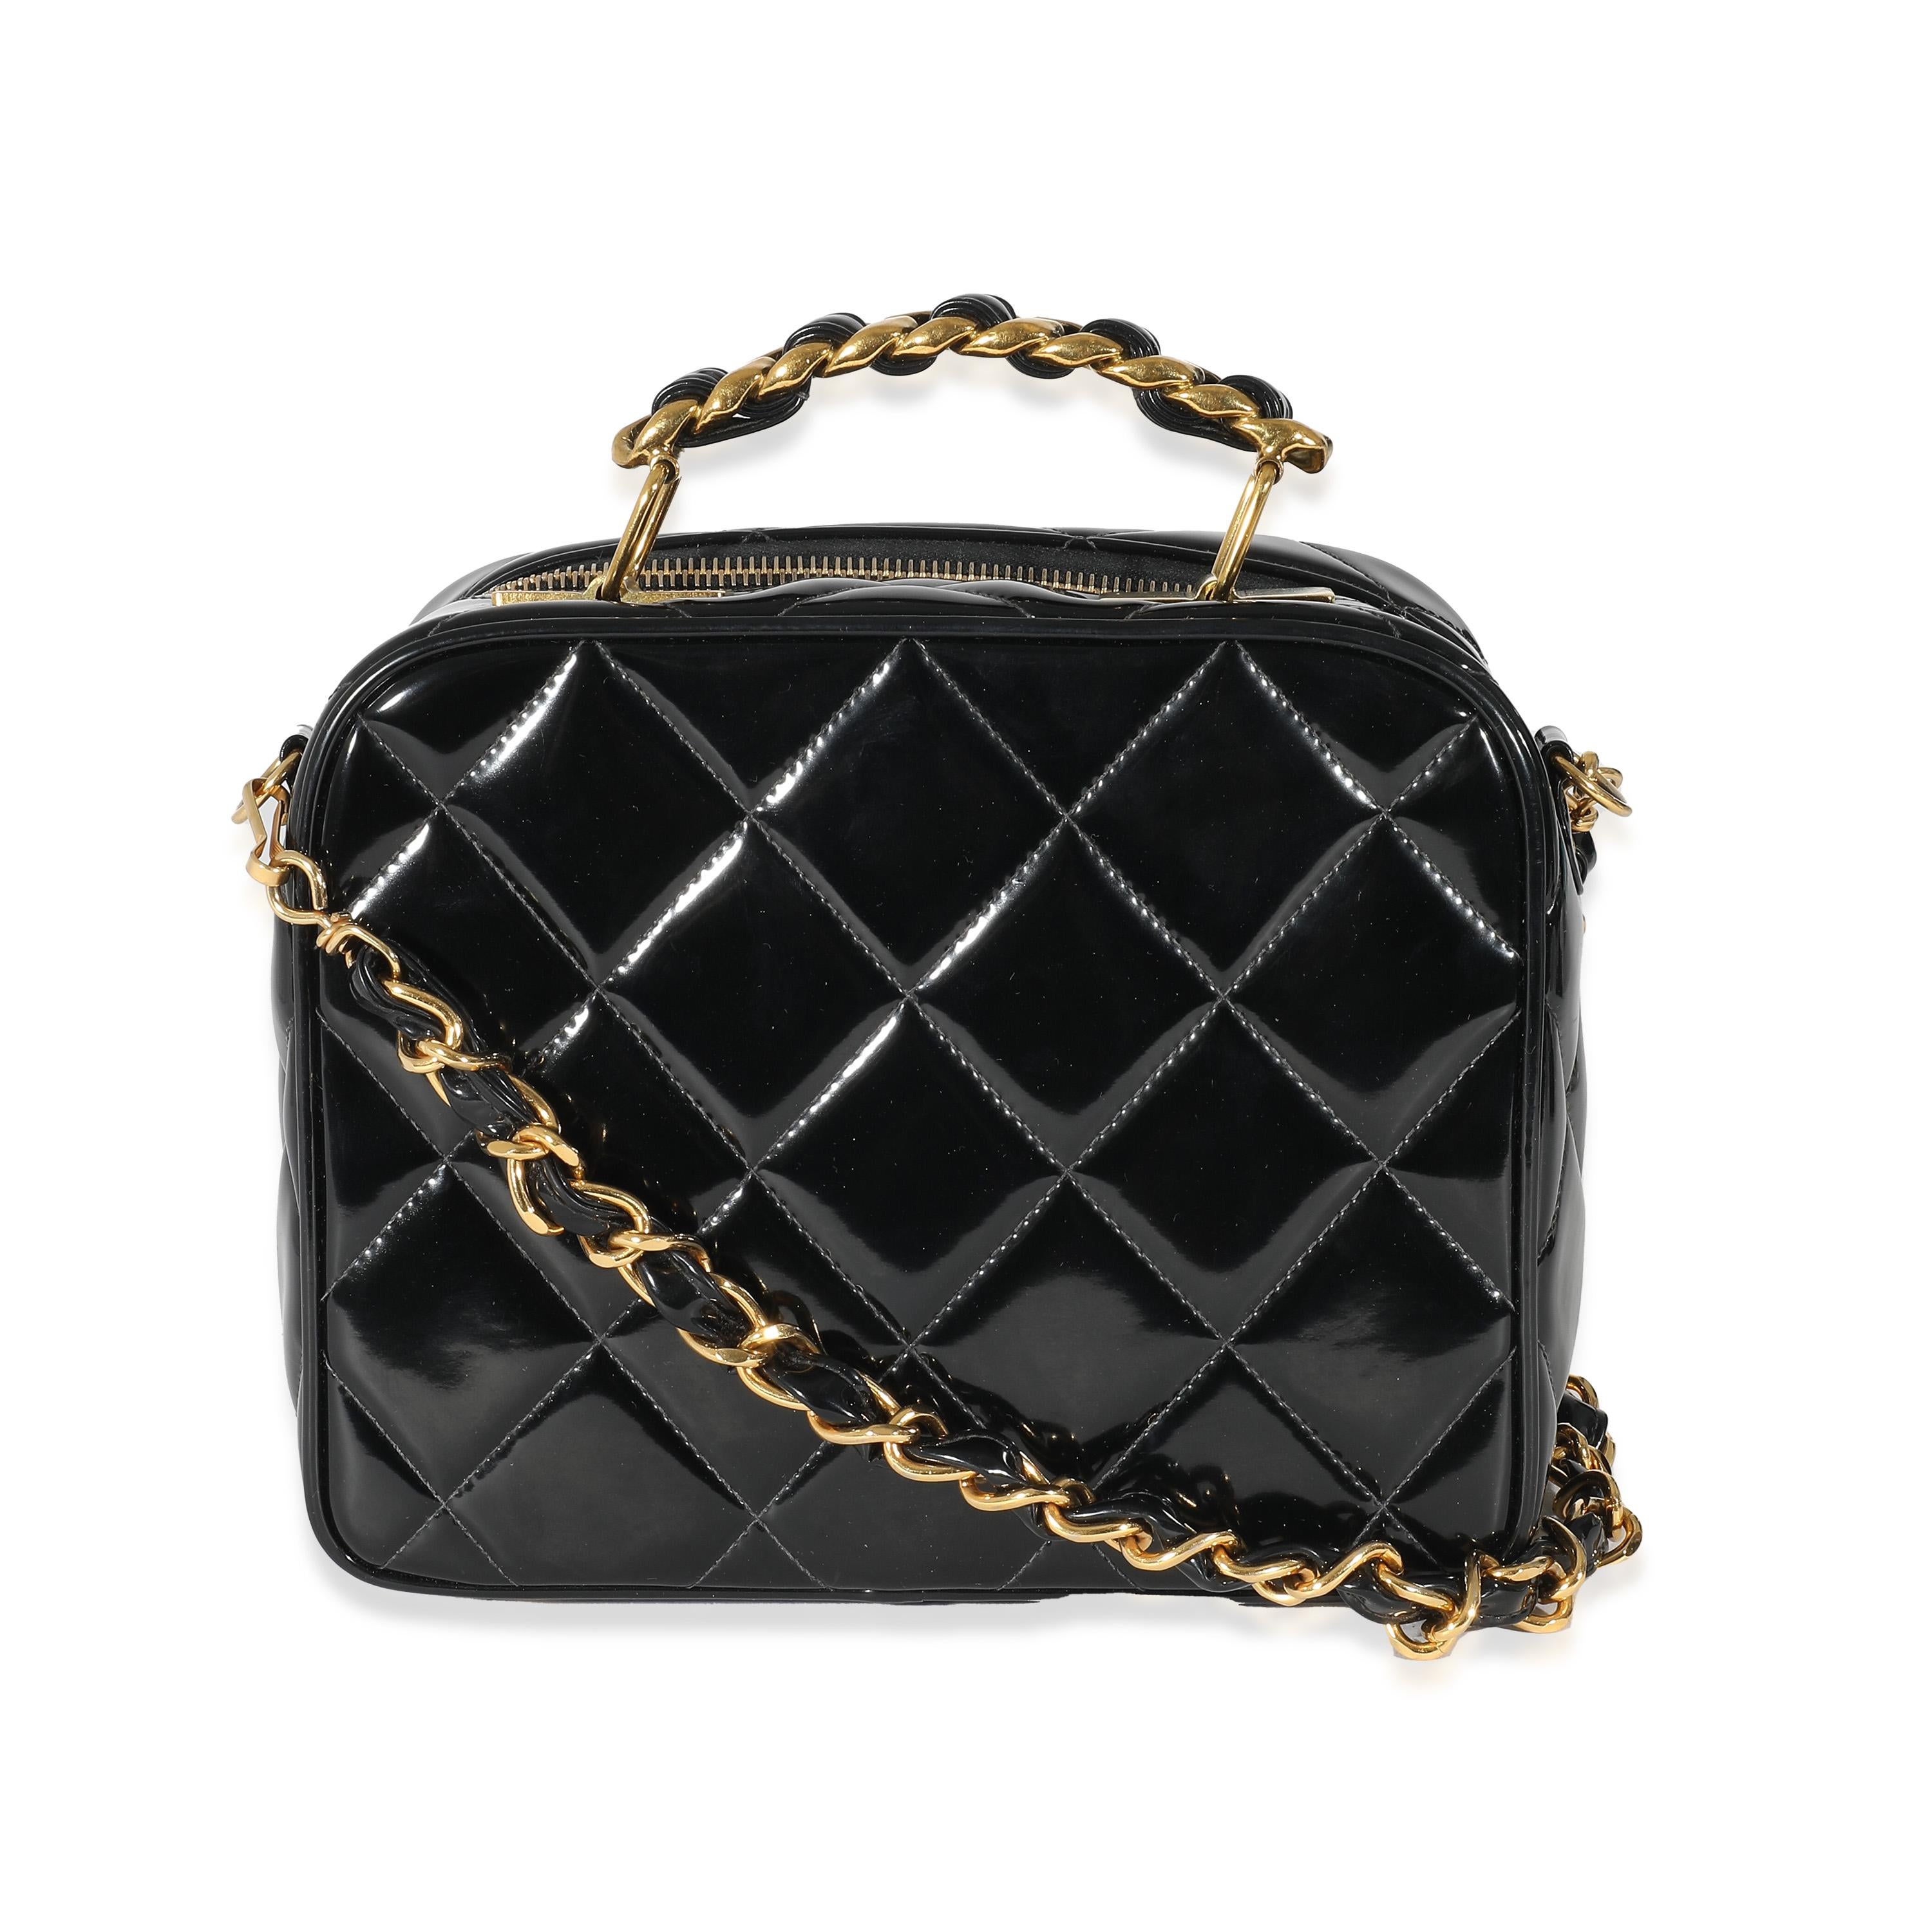 Listing Title: Chanel Vintage Black Quilted Patent Lunch Box Bag
SKU: 135205
Condition: Pre-owned 
Handbag Condition: Good
Condition Comments: Item is in good condition with apparent signs of wear.  Moderate scuffing throughout exterior. Hardware